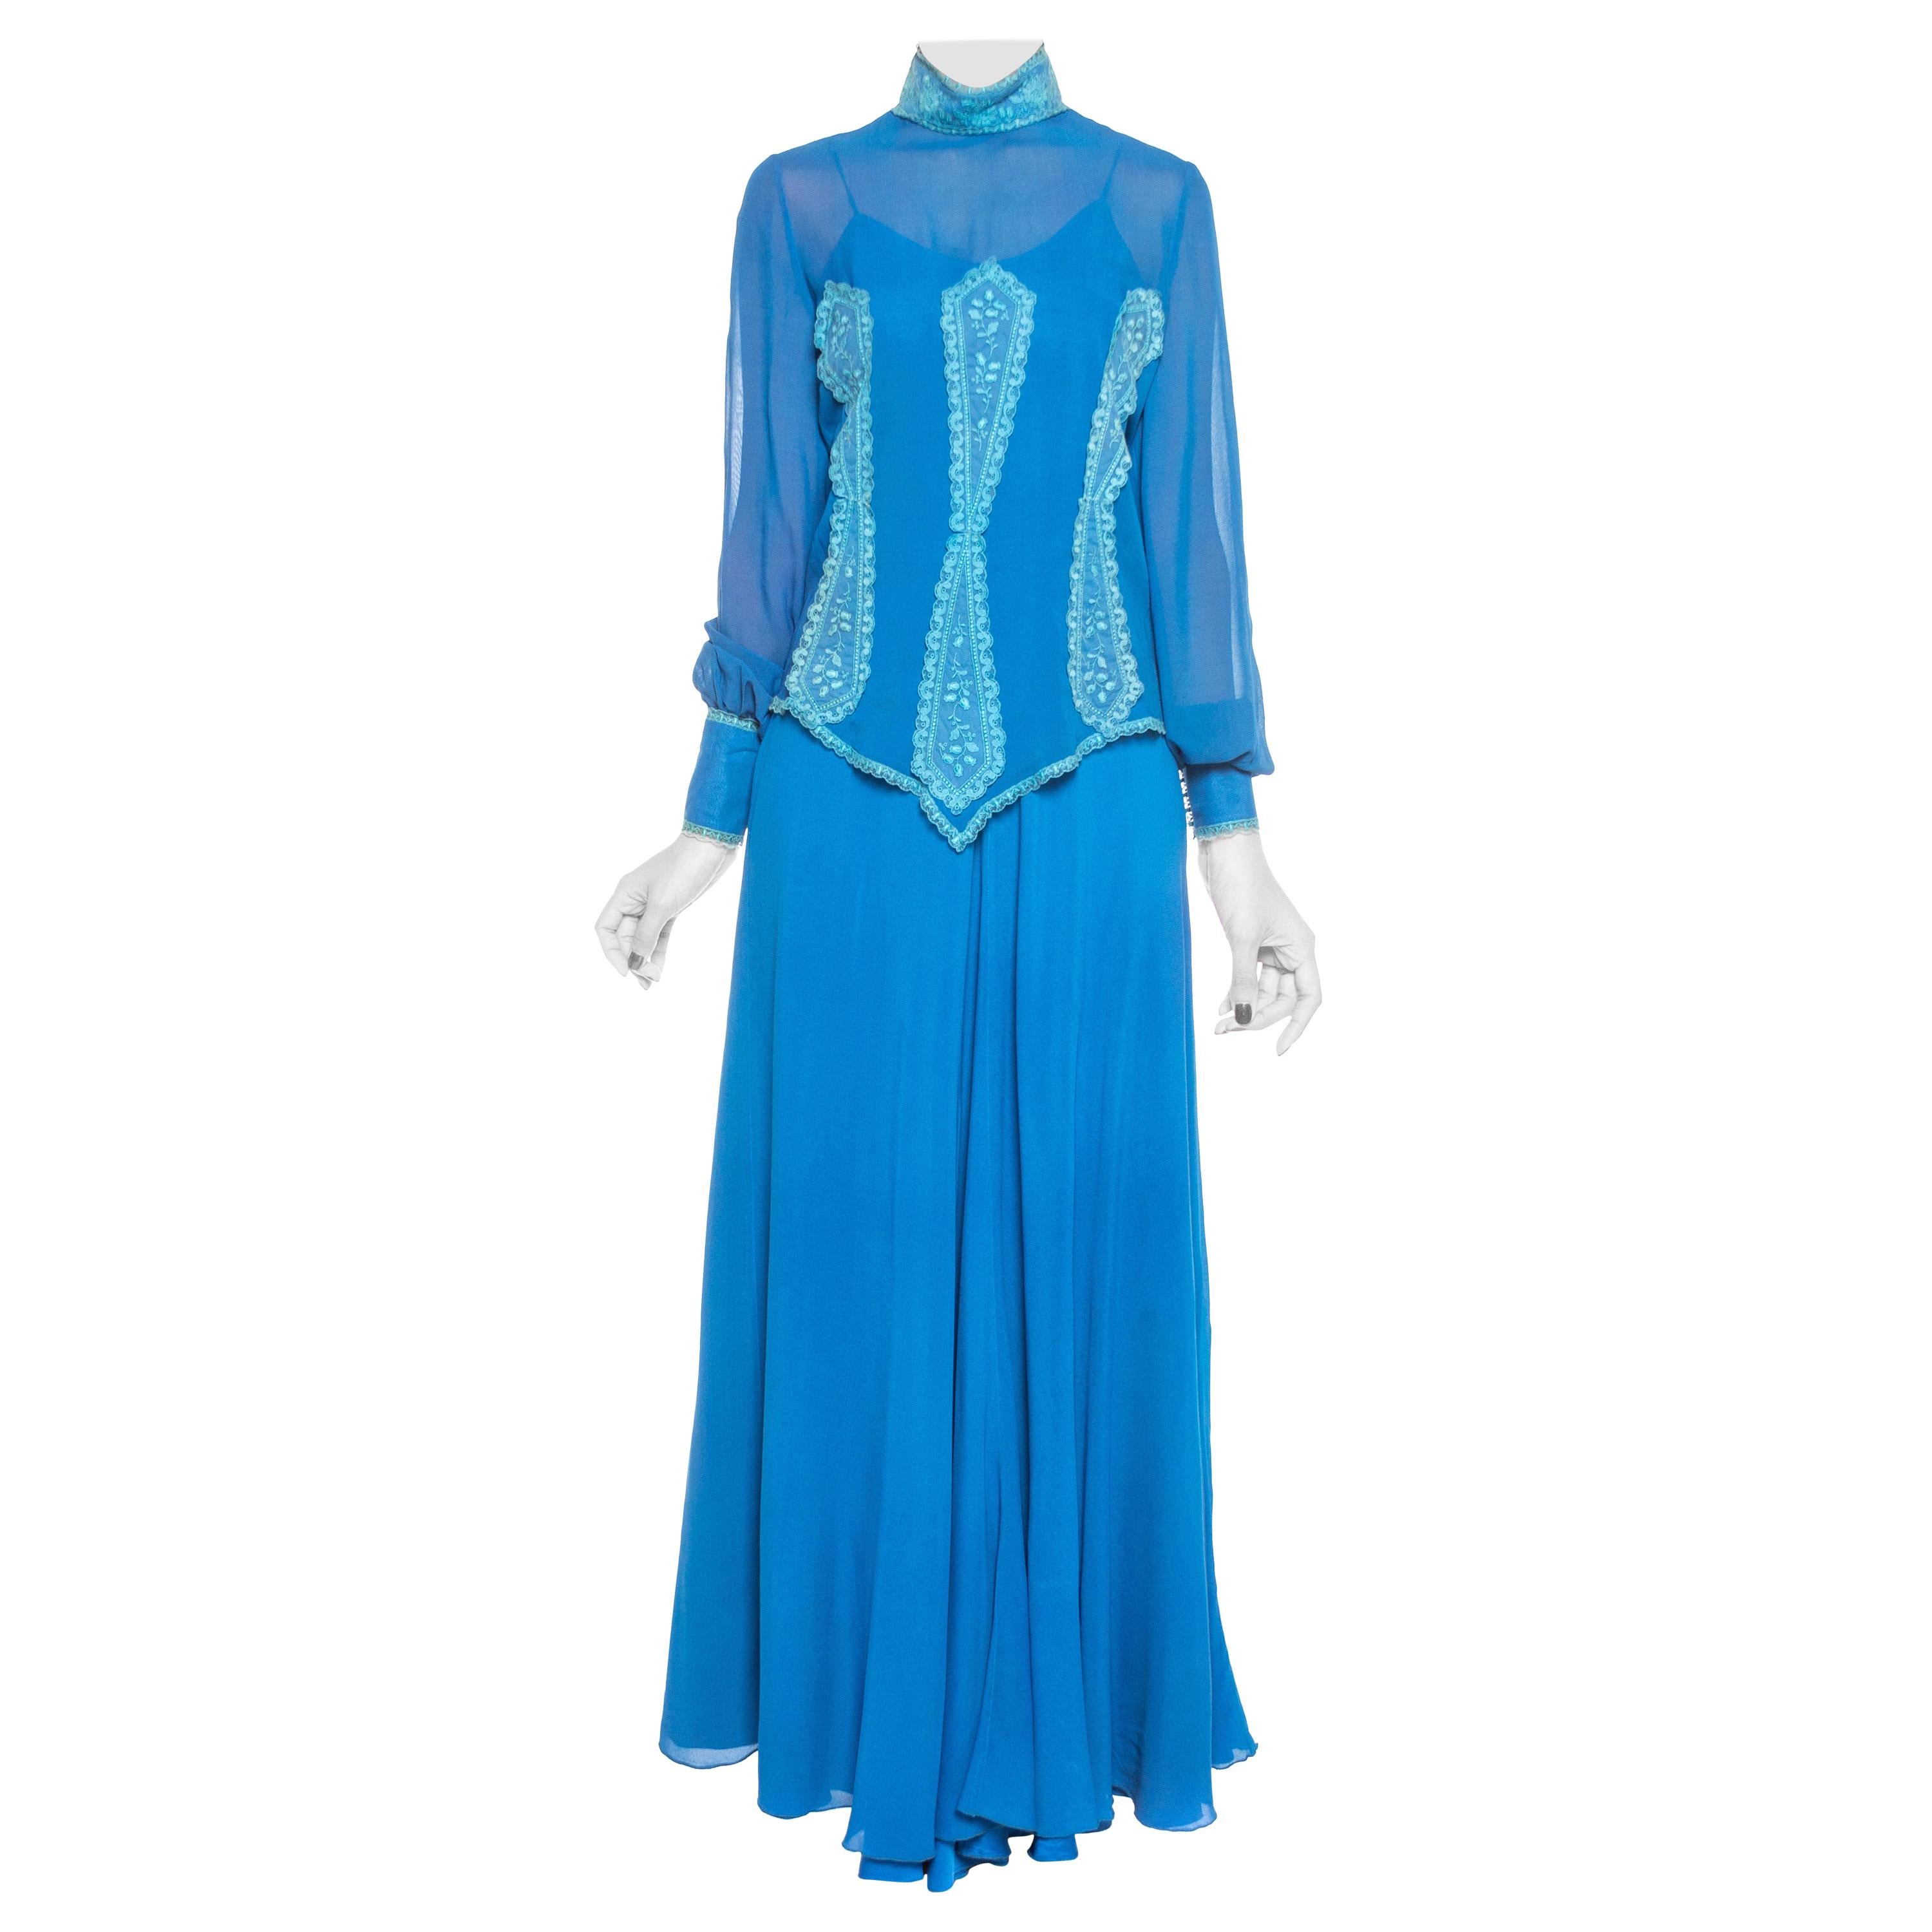 1970S ENZO RUSSO COUTURE Blue Silk Chiffon Victorian Style Dress With Lace Blou